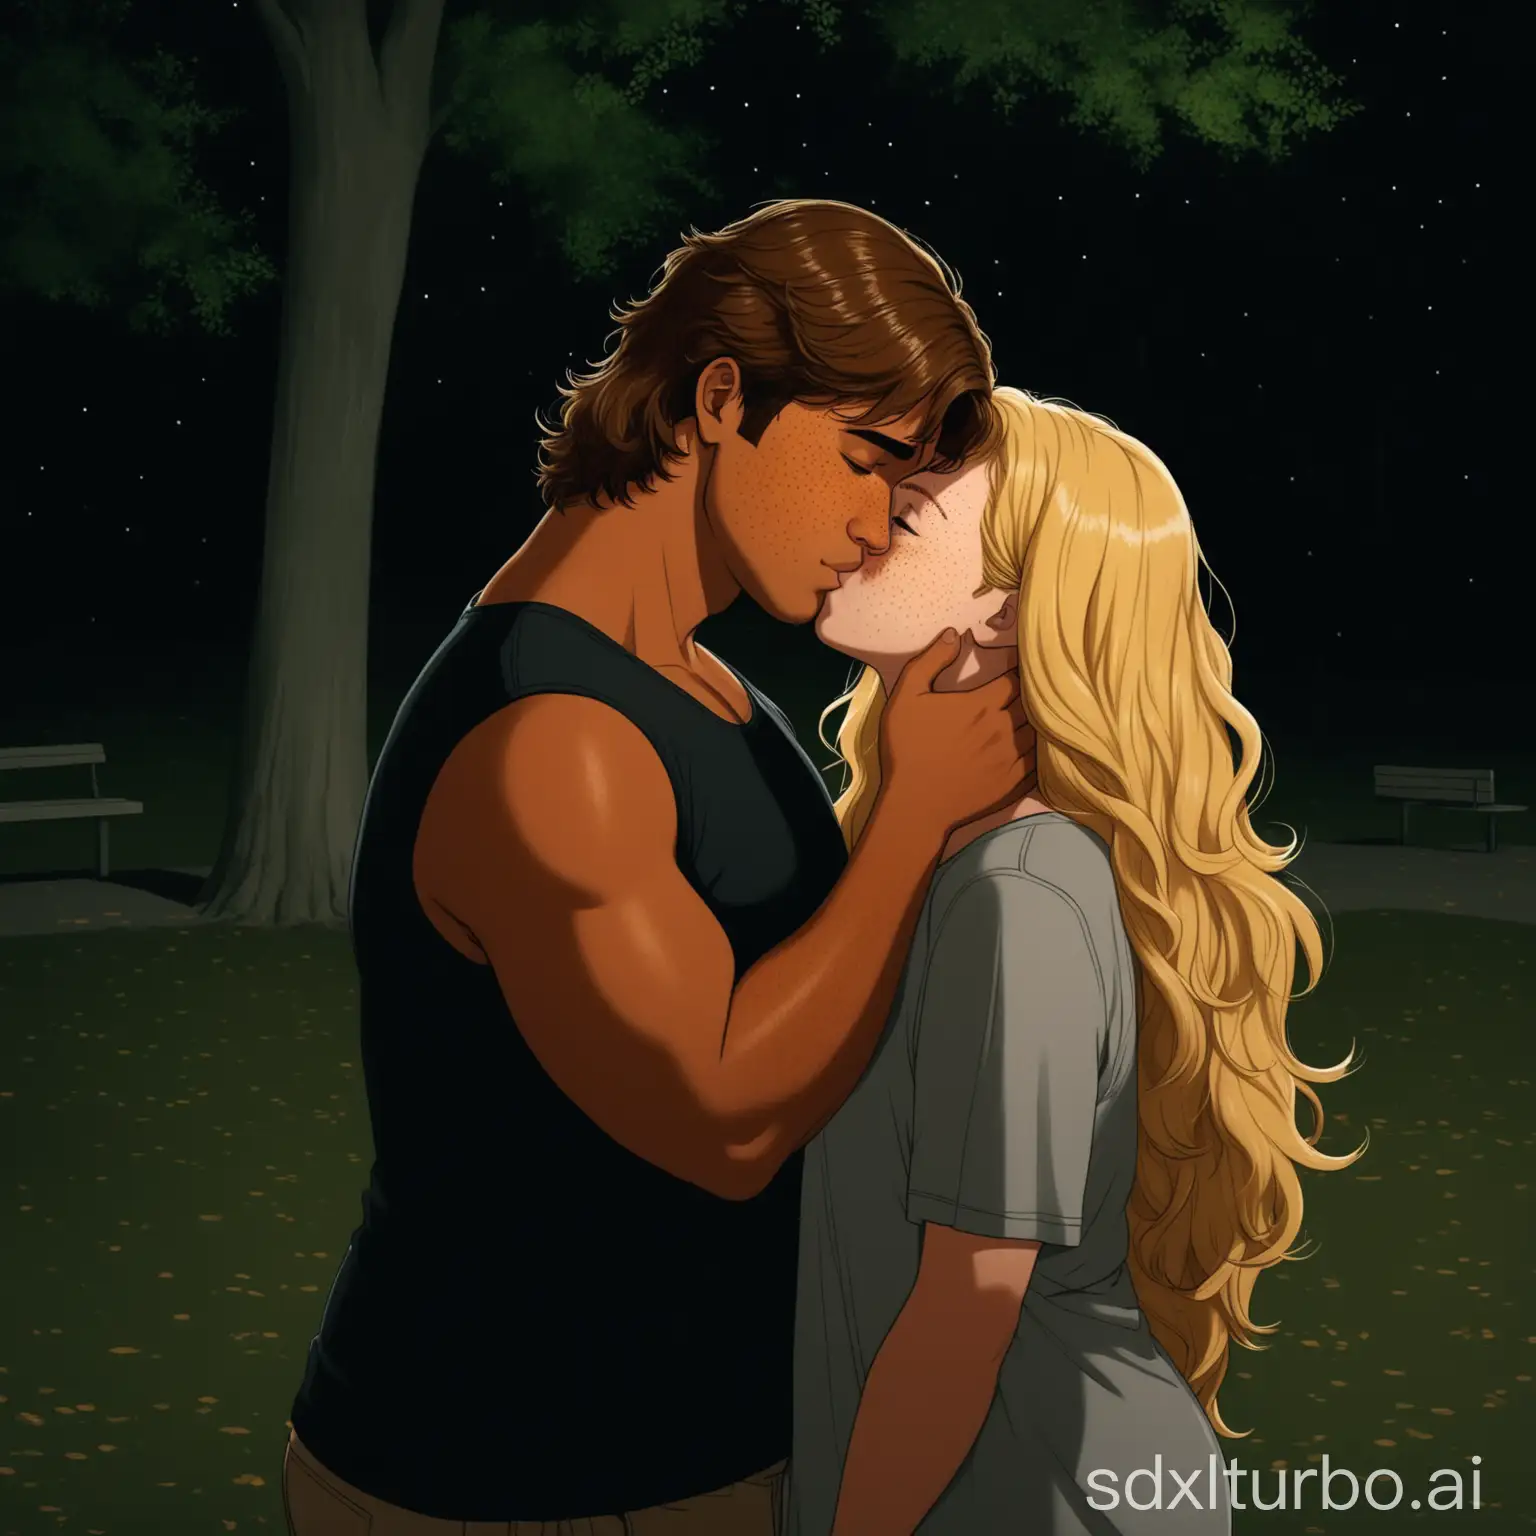 Affectionate-Moment-Tanned-Man-Kissing-Frizzy-Haired-Blonde-in-Dark-Park